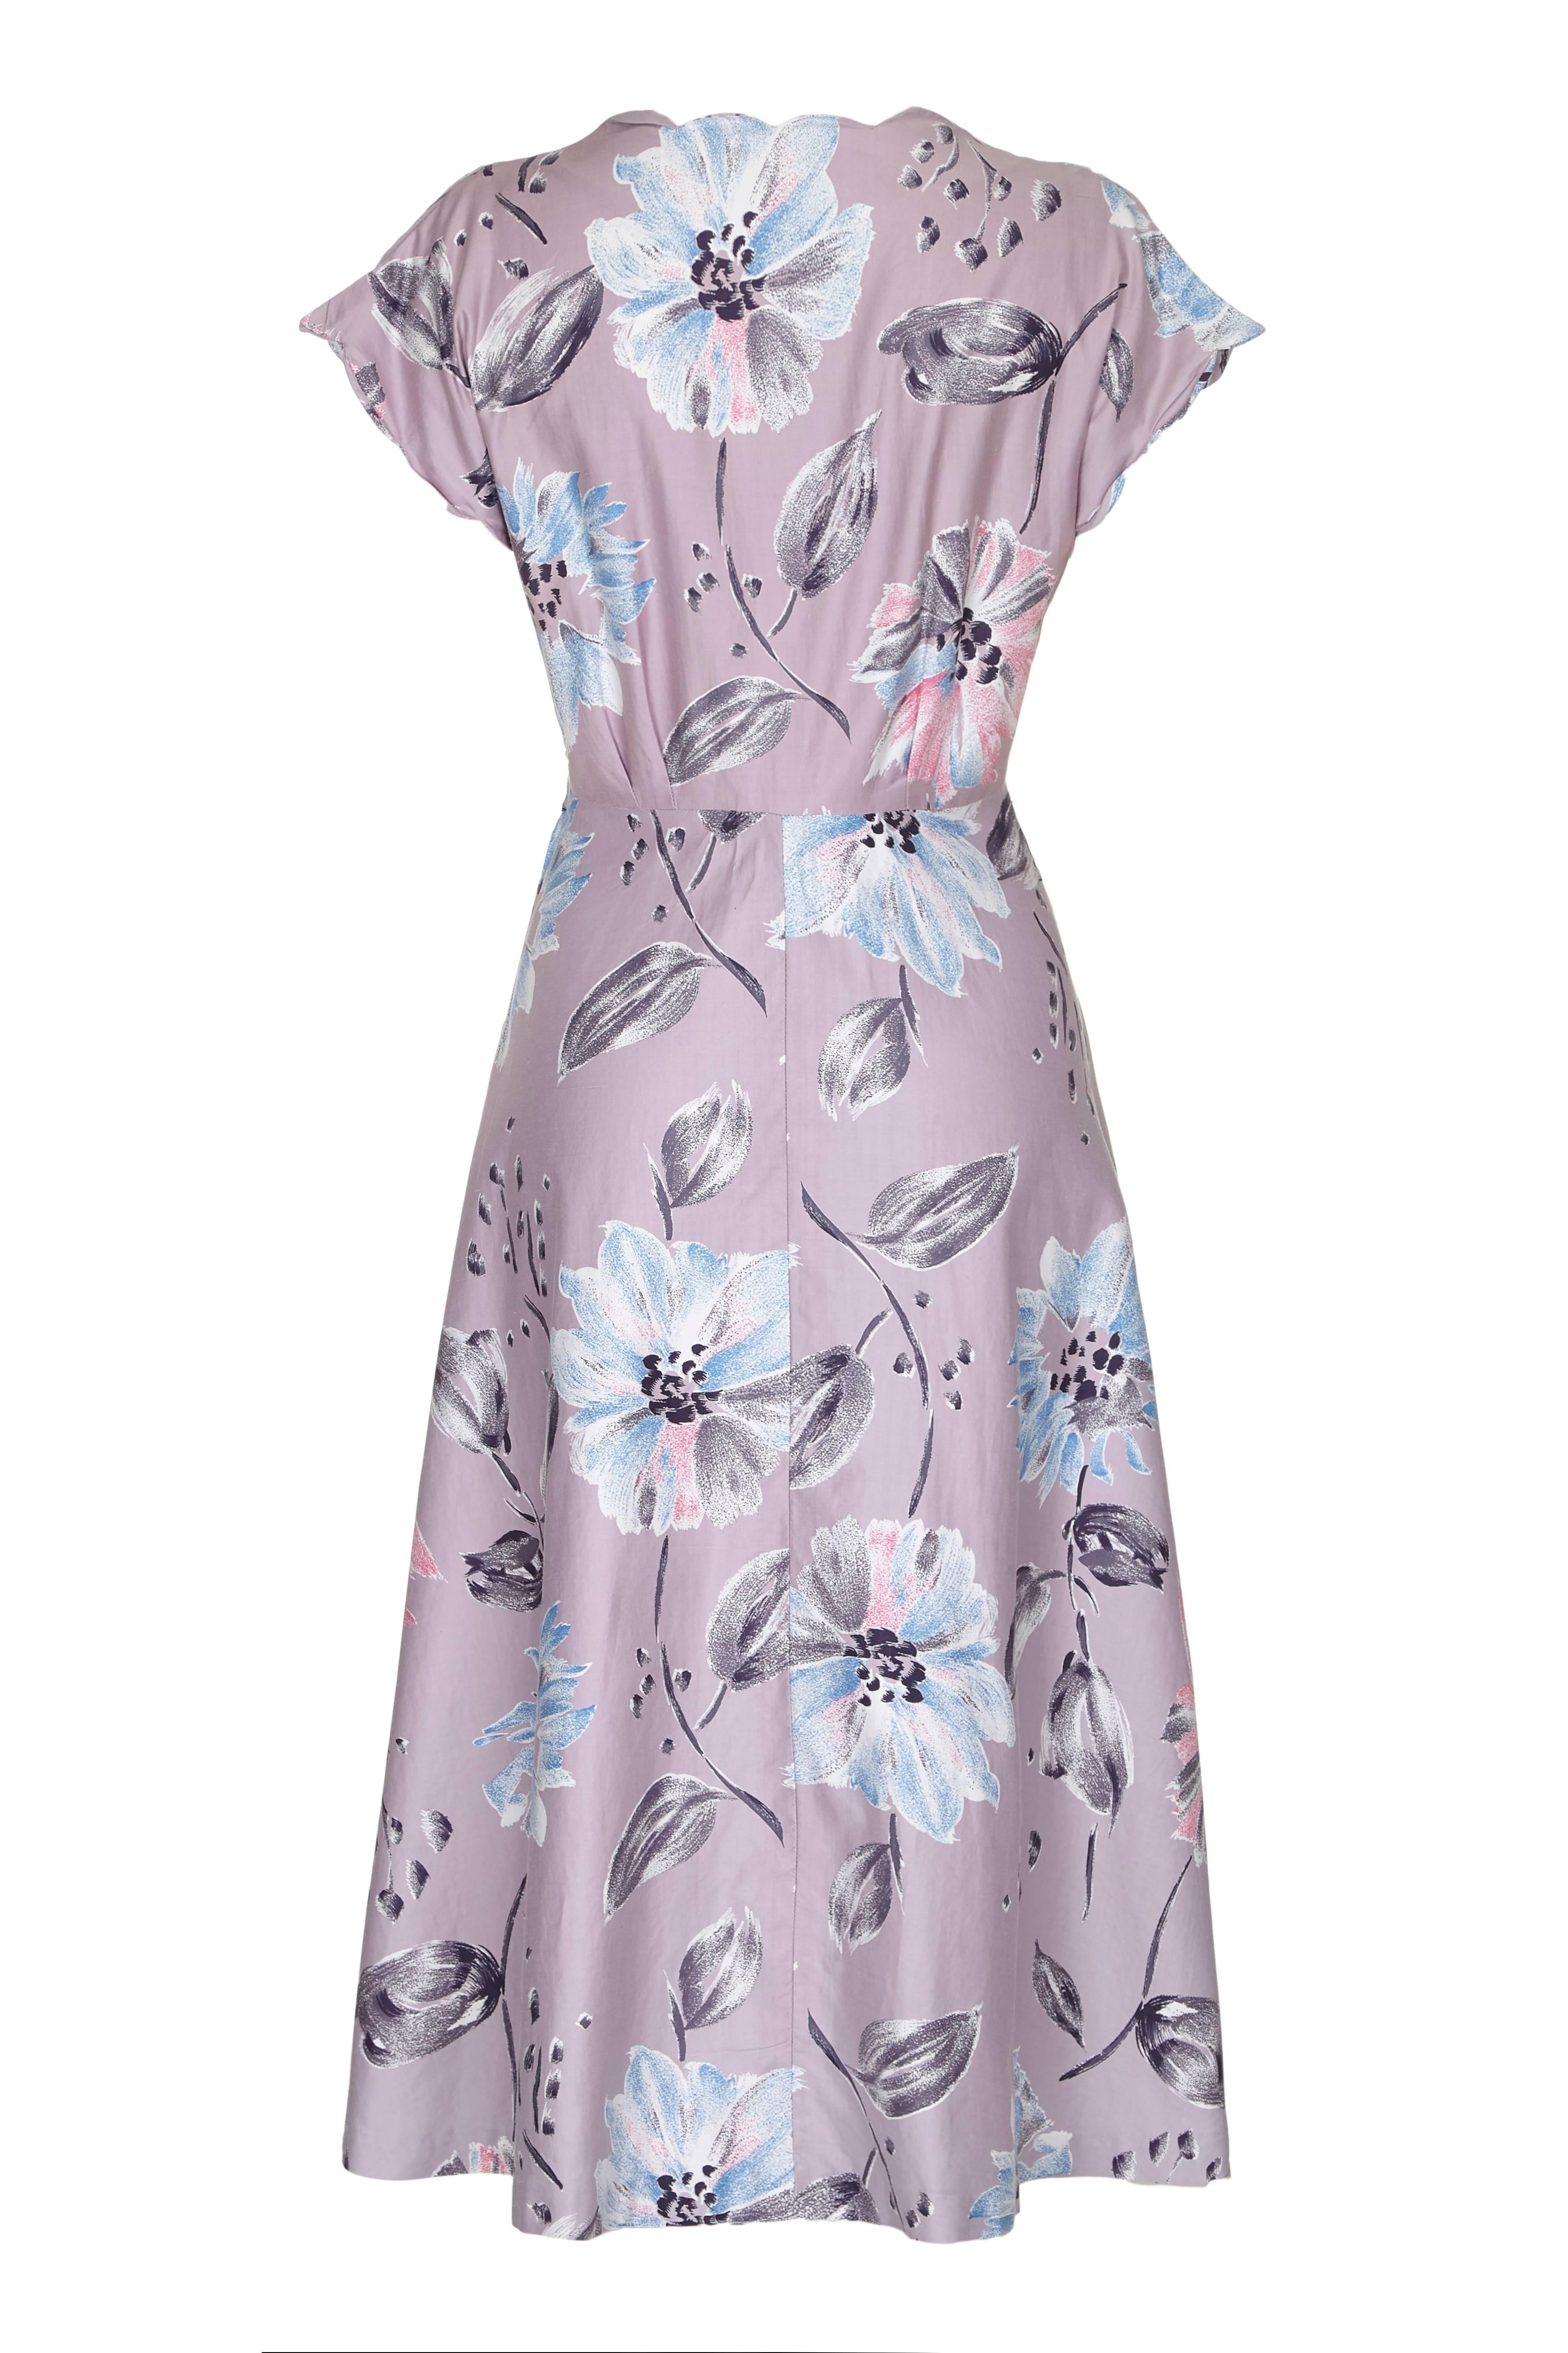 Very pretty unlabelled but professionally made vintage 1950s mauve polished cotton day dress with large floral print.  This dress is classic 50s in style with full skirt, fitted waist and cute scalloped edge detail on the neckline and armholes. It